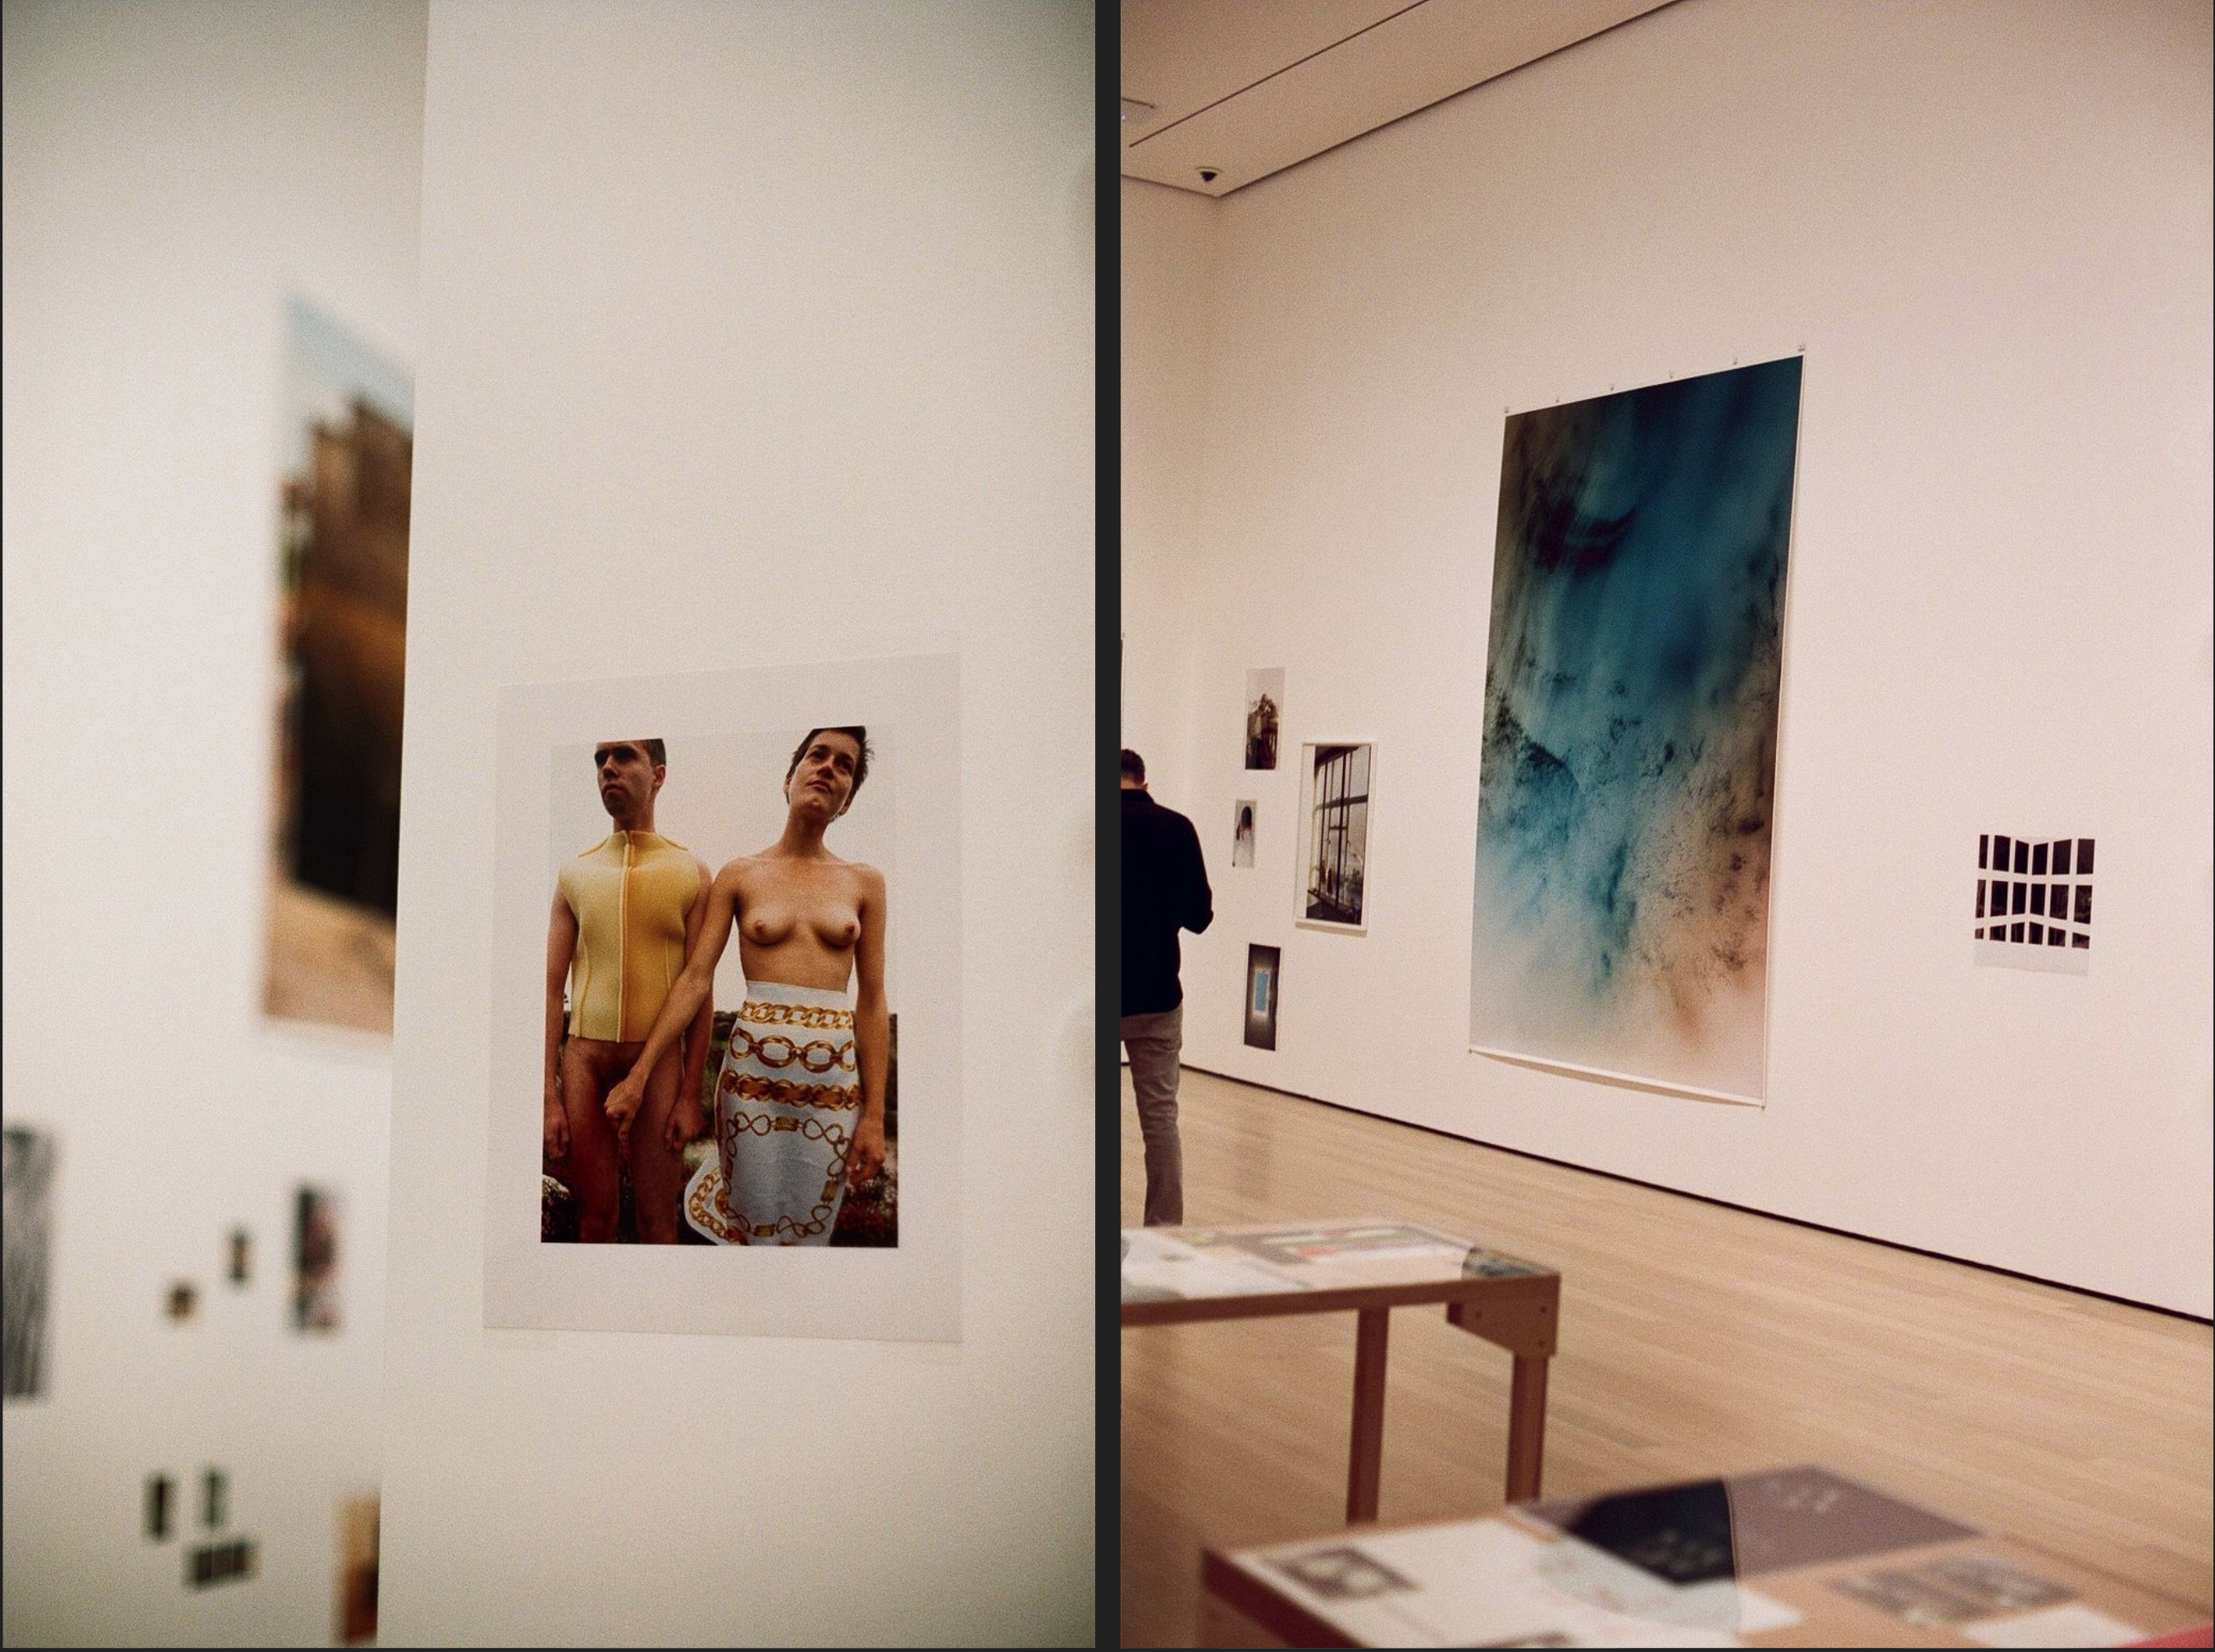 In Wolfgang Tillmans’s MoMA exhibition *To look without fear*, constellations of images grouped on walls and tabletops as photocopies, color or black-and-white photographs, and video projections reflect the artist’s perception of his own environment—and the world he wants to live in.